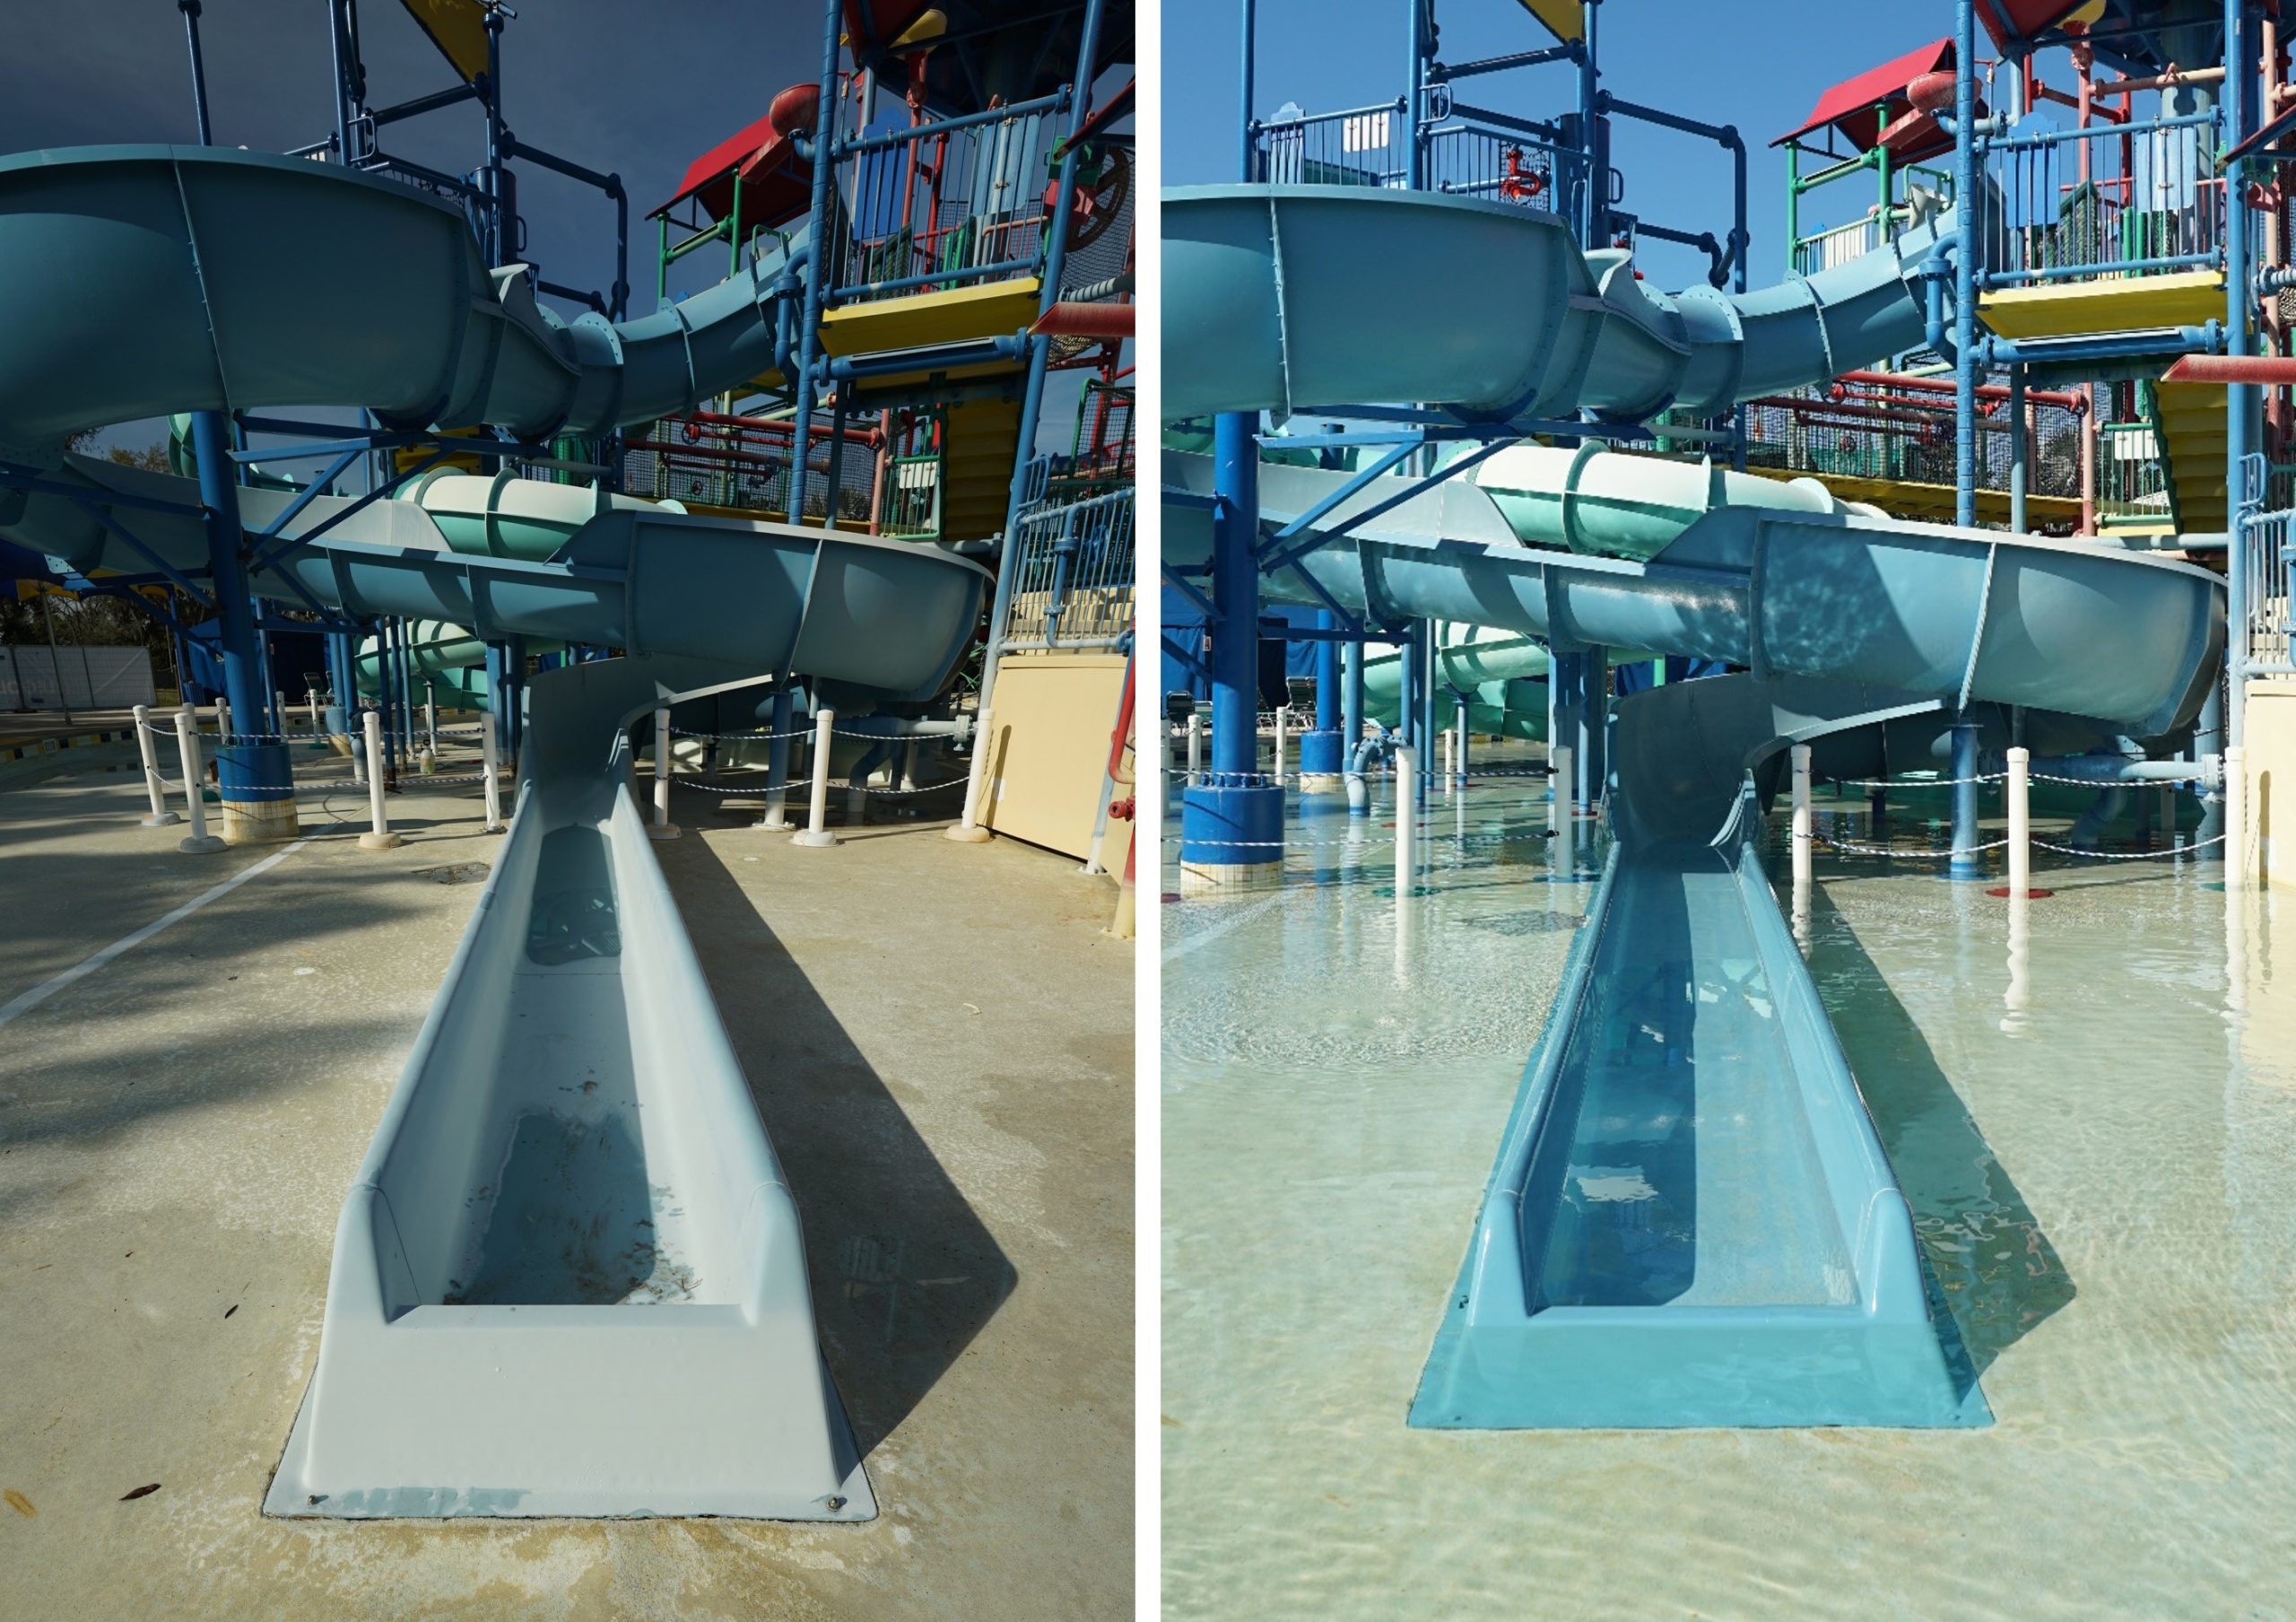 Blue water slide refurbishment before and after comparison